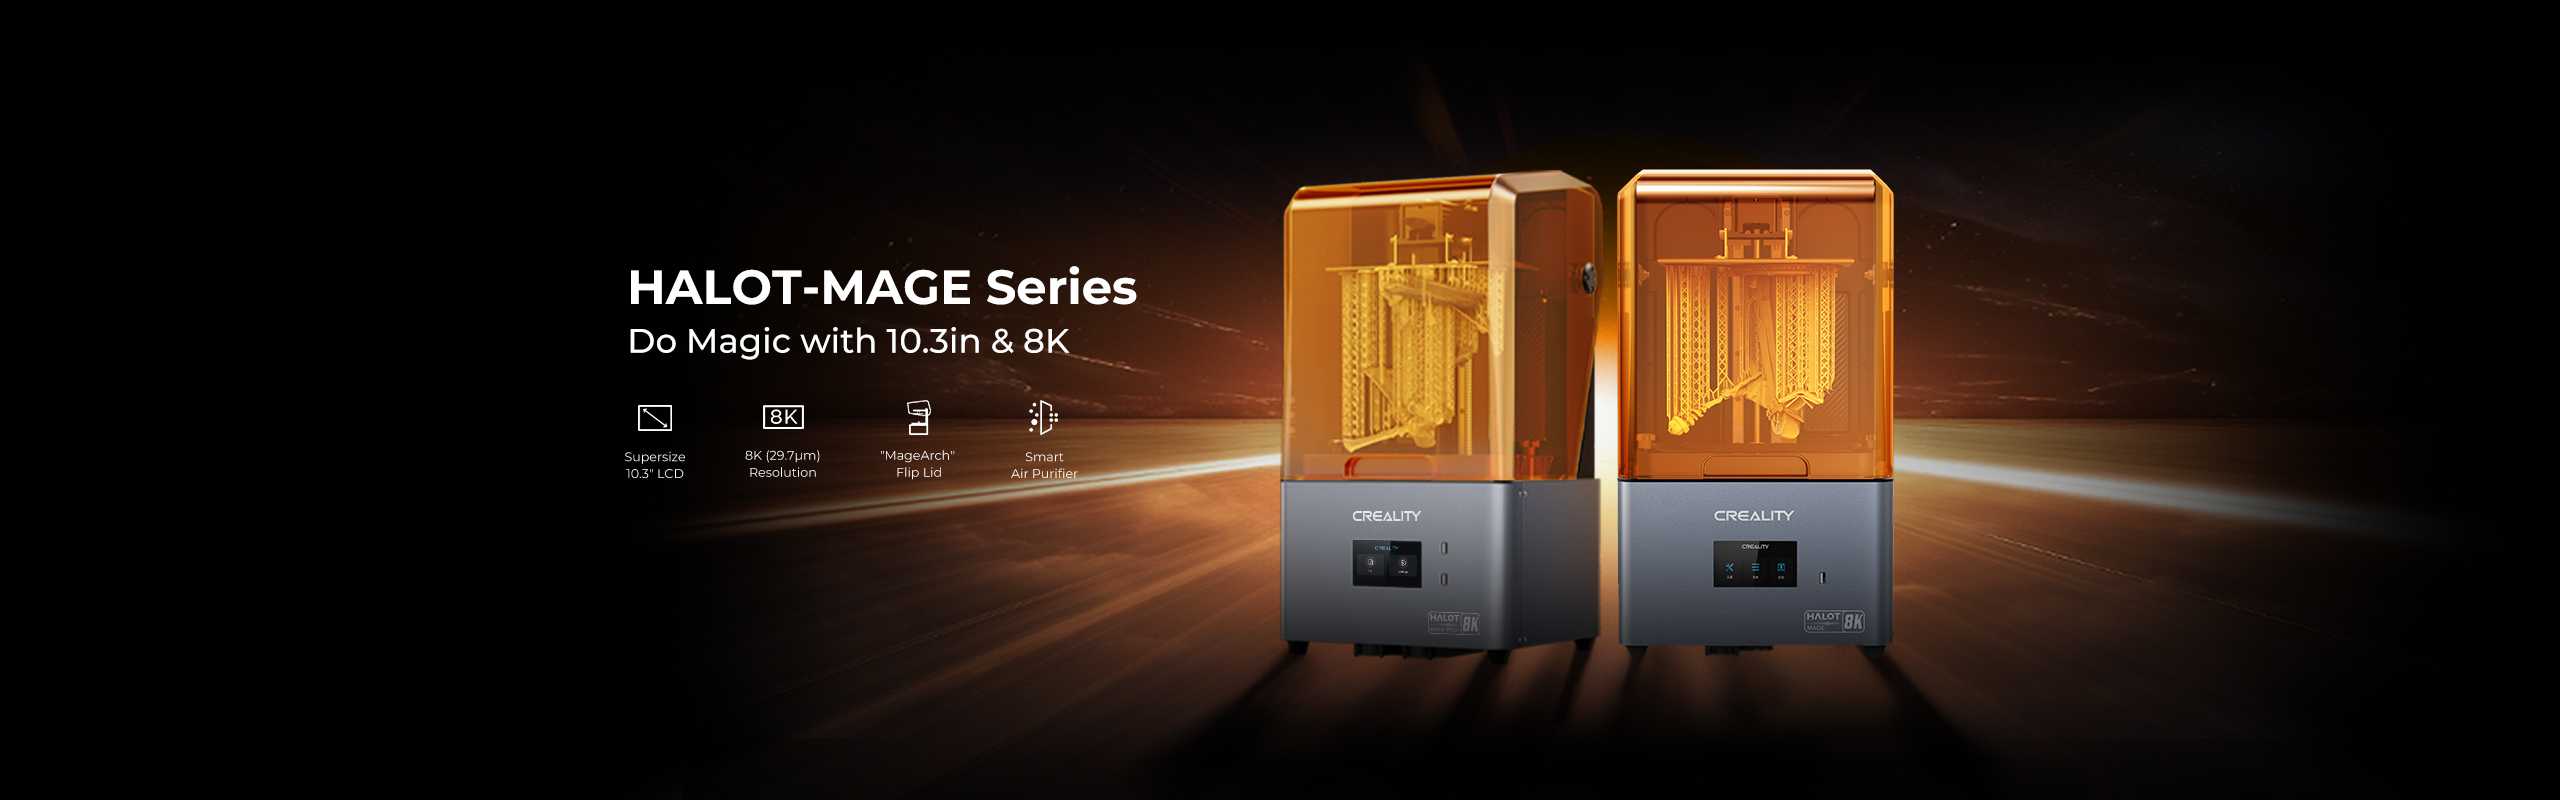 Halot Mage | Creality Launches Ground-breaking HALOT-MAGE Series 8K Resin Printers